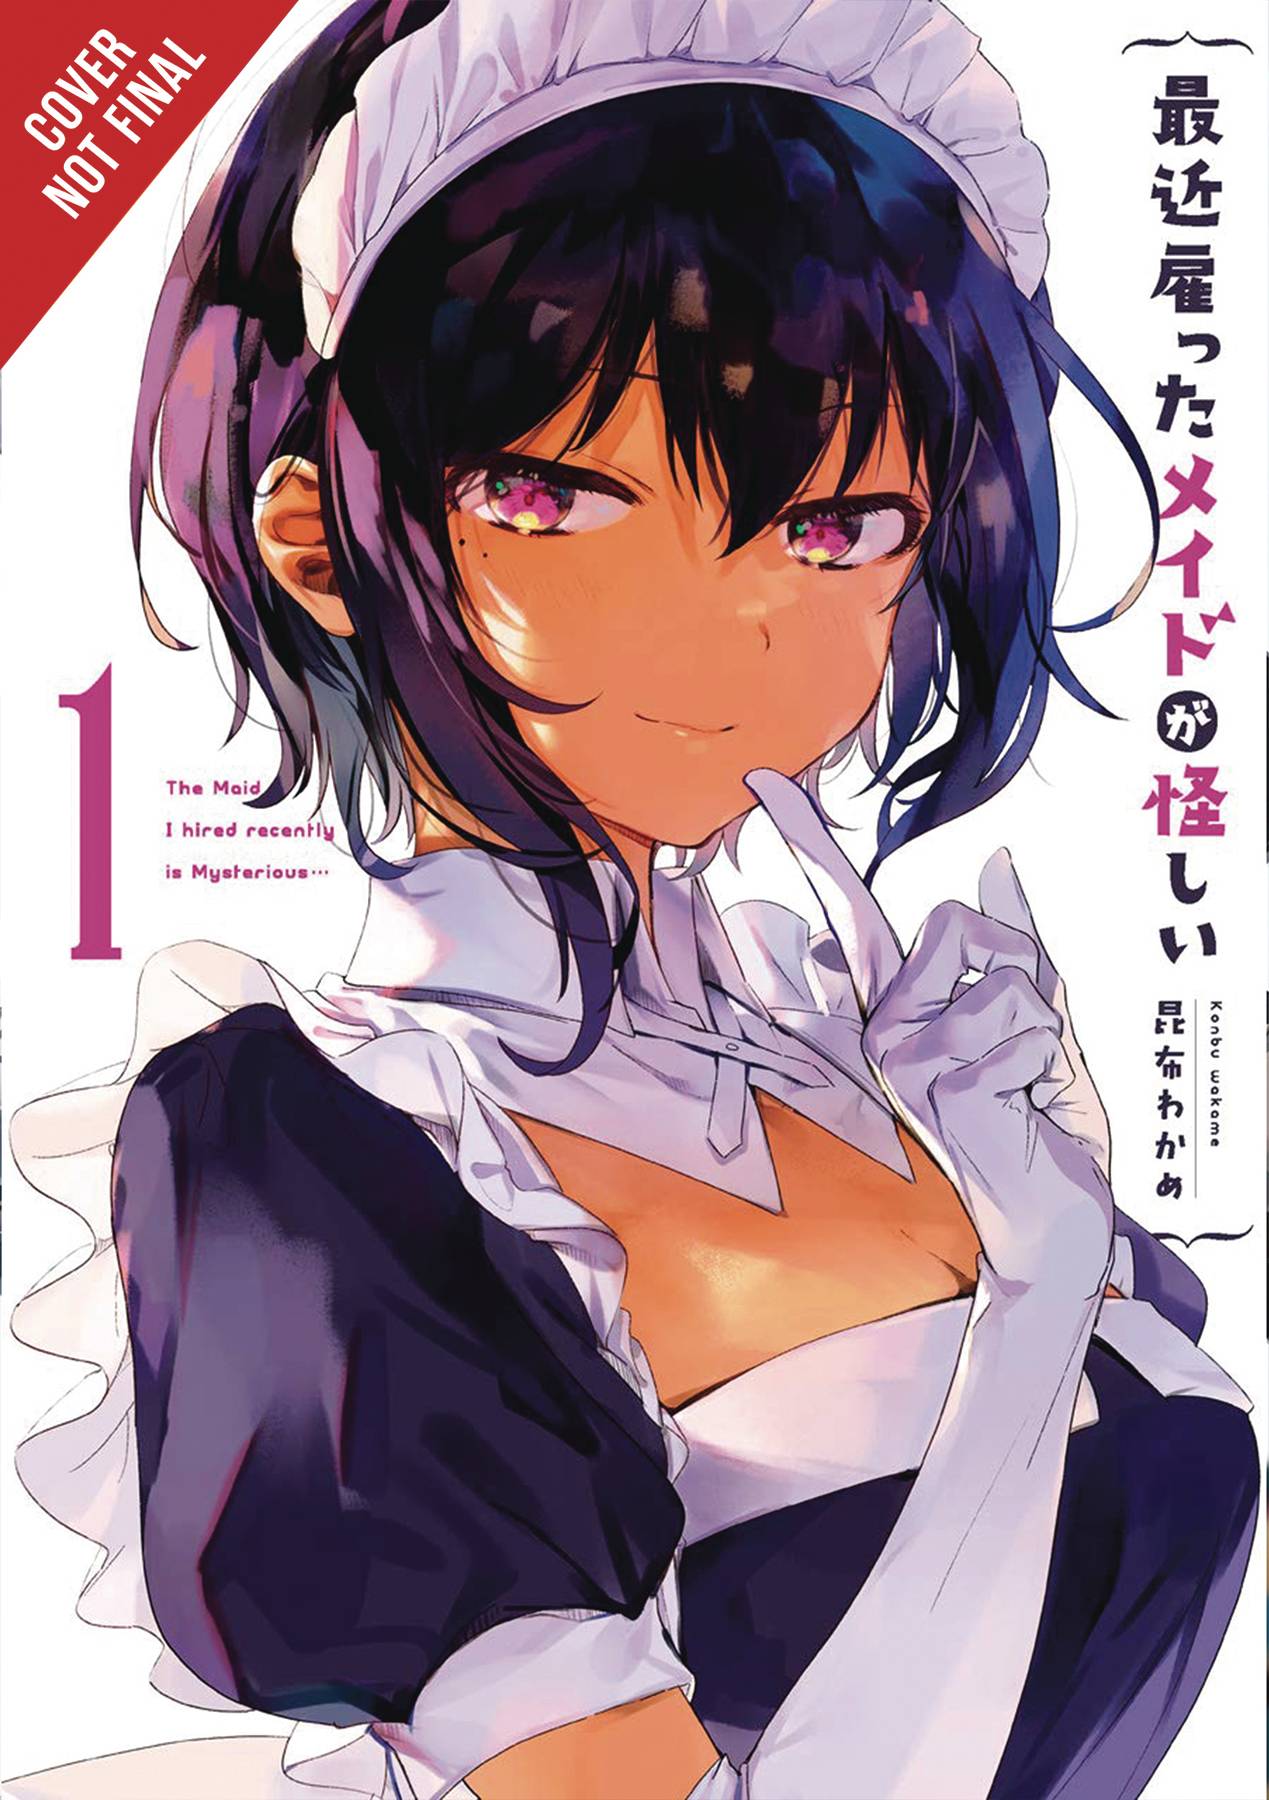 Maid I Hired Recently Vol. 01